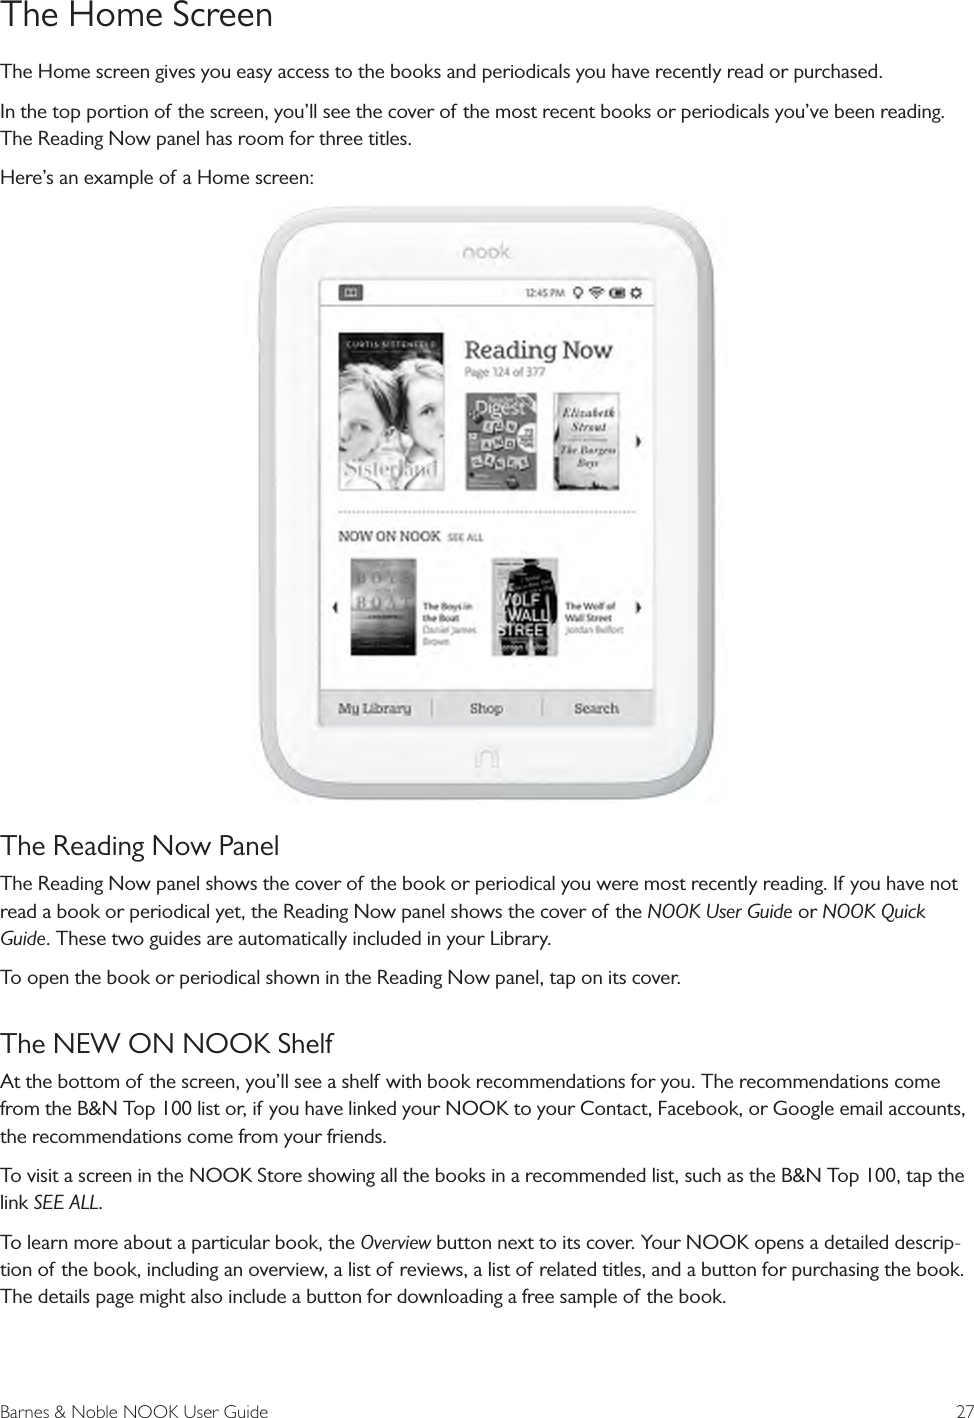 Barnes &amp; Noble NOOK User Guide  27The Home ScreenThe Home screen gives you easy access to the books and periodicals you have recently read or purchased.In the top portion of the screen, you’ll see the cover of the most recent books or periodicals you’ve been reading. The Reading Now panel has room for three titles. Here’s an example of a Home screen:The Reading Now PanelThe Reading Now panel shows the cover of the book or periodical you were most recently reading. If you have not read a book or periodical yet, the Reading Now panel shows the cover of the NOOK User Guide or NOOK Quick Guide. These two guides are automatically included in your Library. To open the book or periodical shown in the Reading Now panel, tap on its cover.The NEW ON NOOK ShelfAt the bottom of the screen, you’ll see a shelf with book recommendations for you. The recommendations come from the B&amp;N Top 100 list or, if you have linked your NOOK to your Contact, Facebook, or Google email accounts, the recommendations come from your friends.To visit a screen in the NOOK Store showing all the books in a recommended list, such as the B&amp;N Top 100, tap the link SEE ALL.To learn more about a particular book, the Overview button next to its cover. Your NOOK opens a detailed descrip-tion of the book, including an overview, a list of reviews, a list of related titles, and a button for purchasing the book. The details page might also include a button for downloading a free sample of the book.